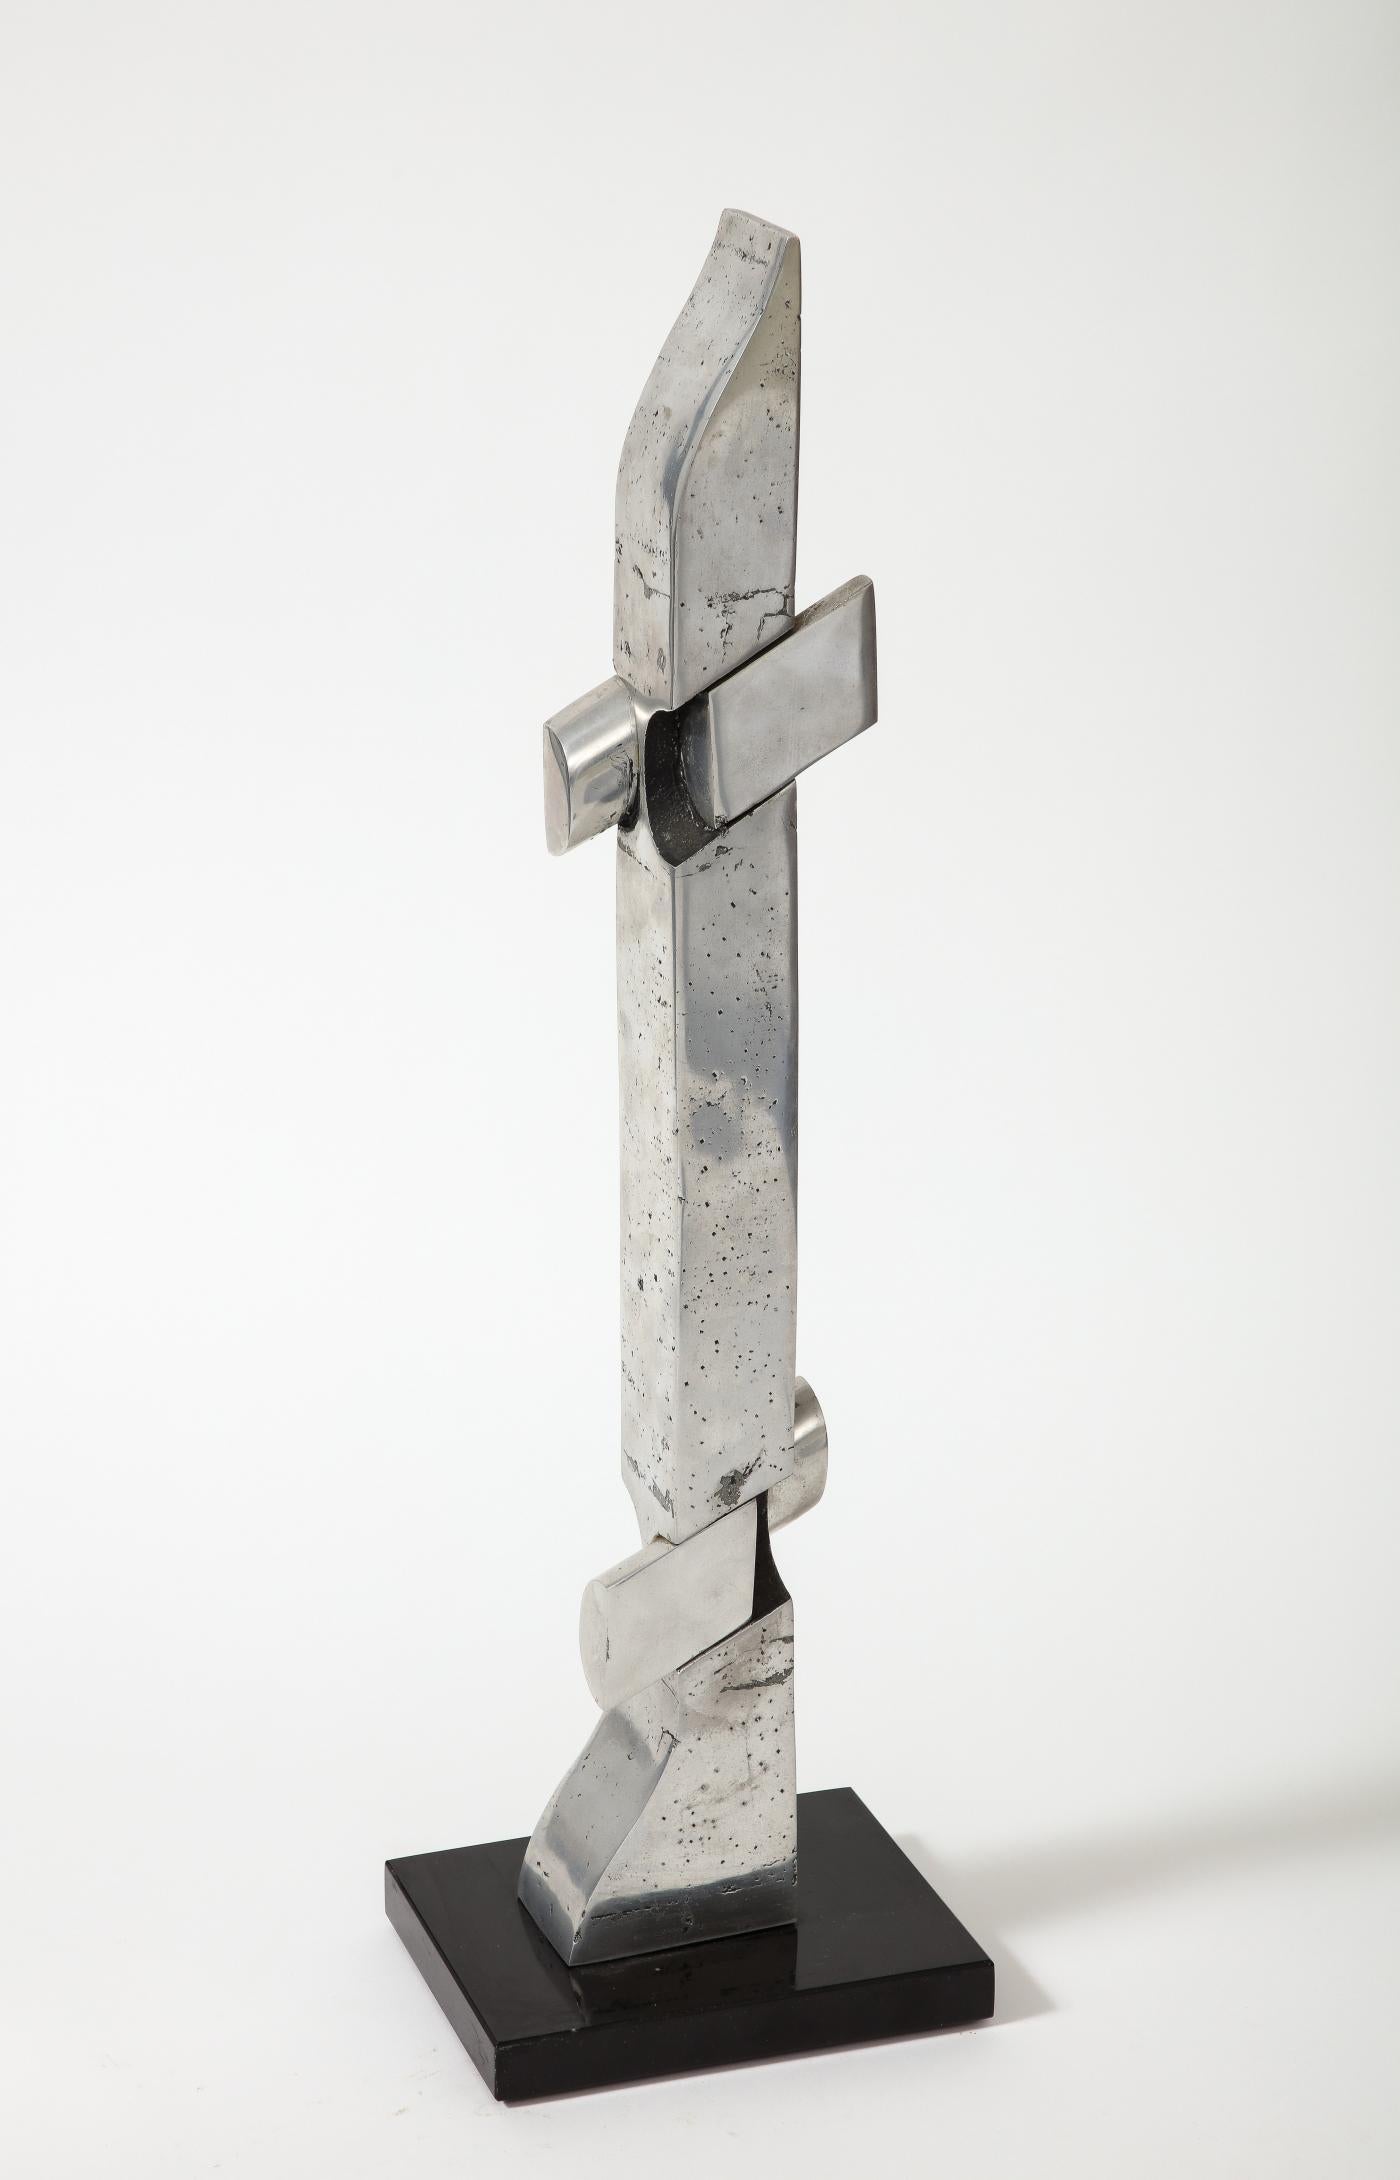 Abstract Chromed Steel Sculpture by Thibaud Weisz, c. 1950 For Sale 1